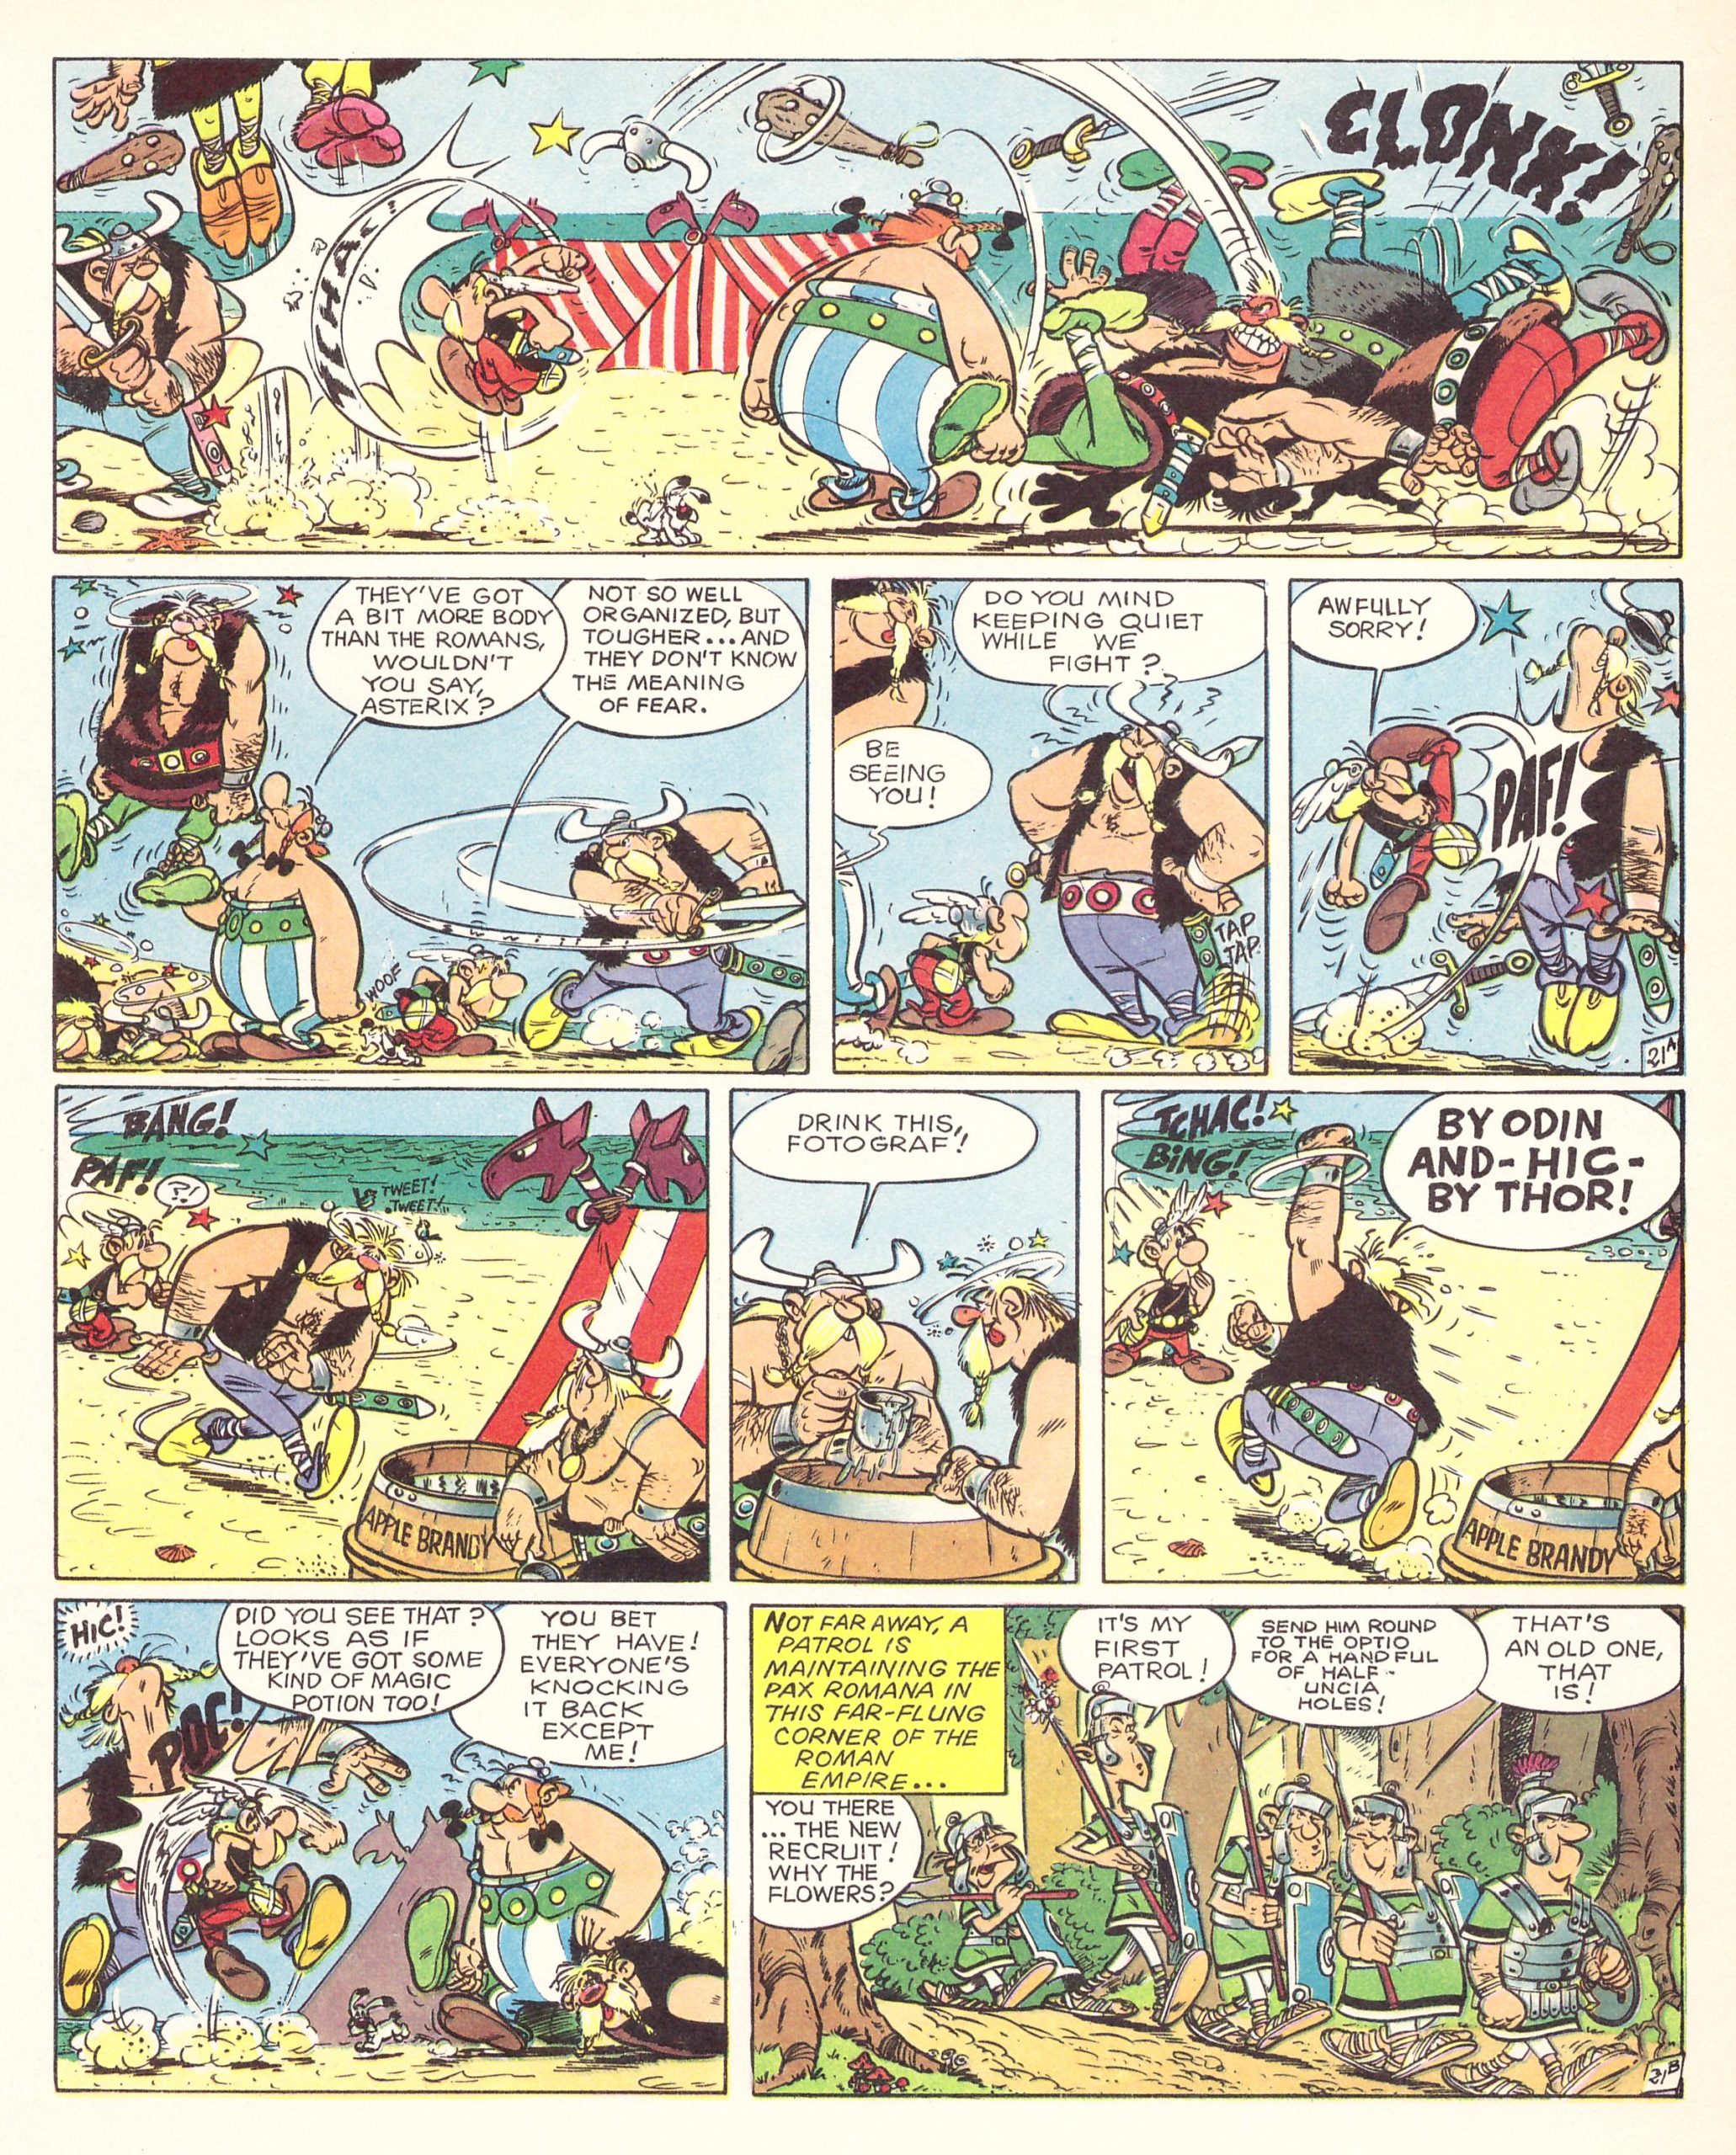 Asterix and the Normans review